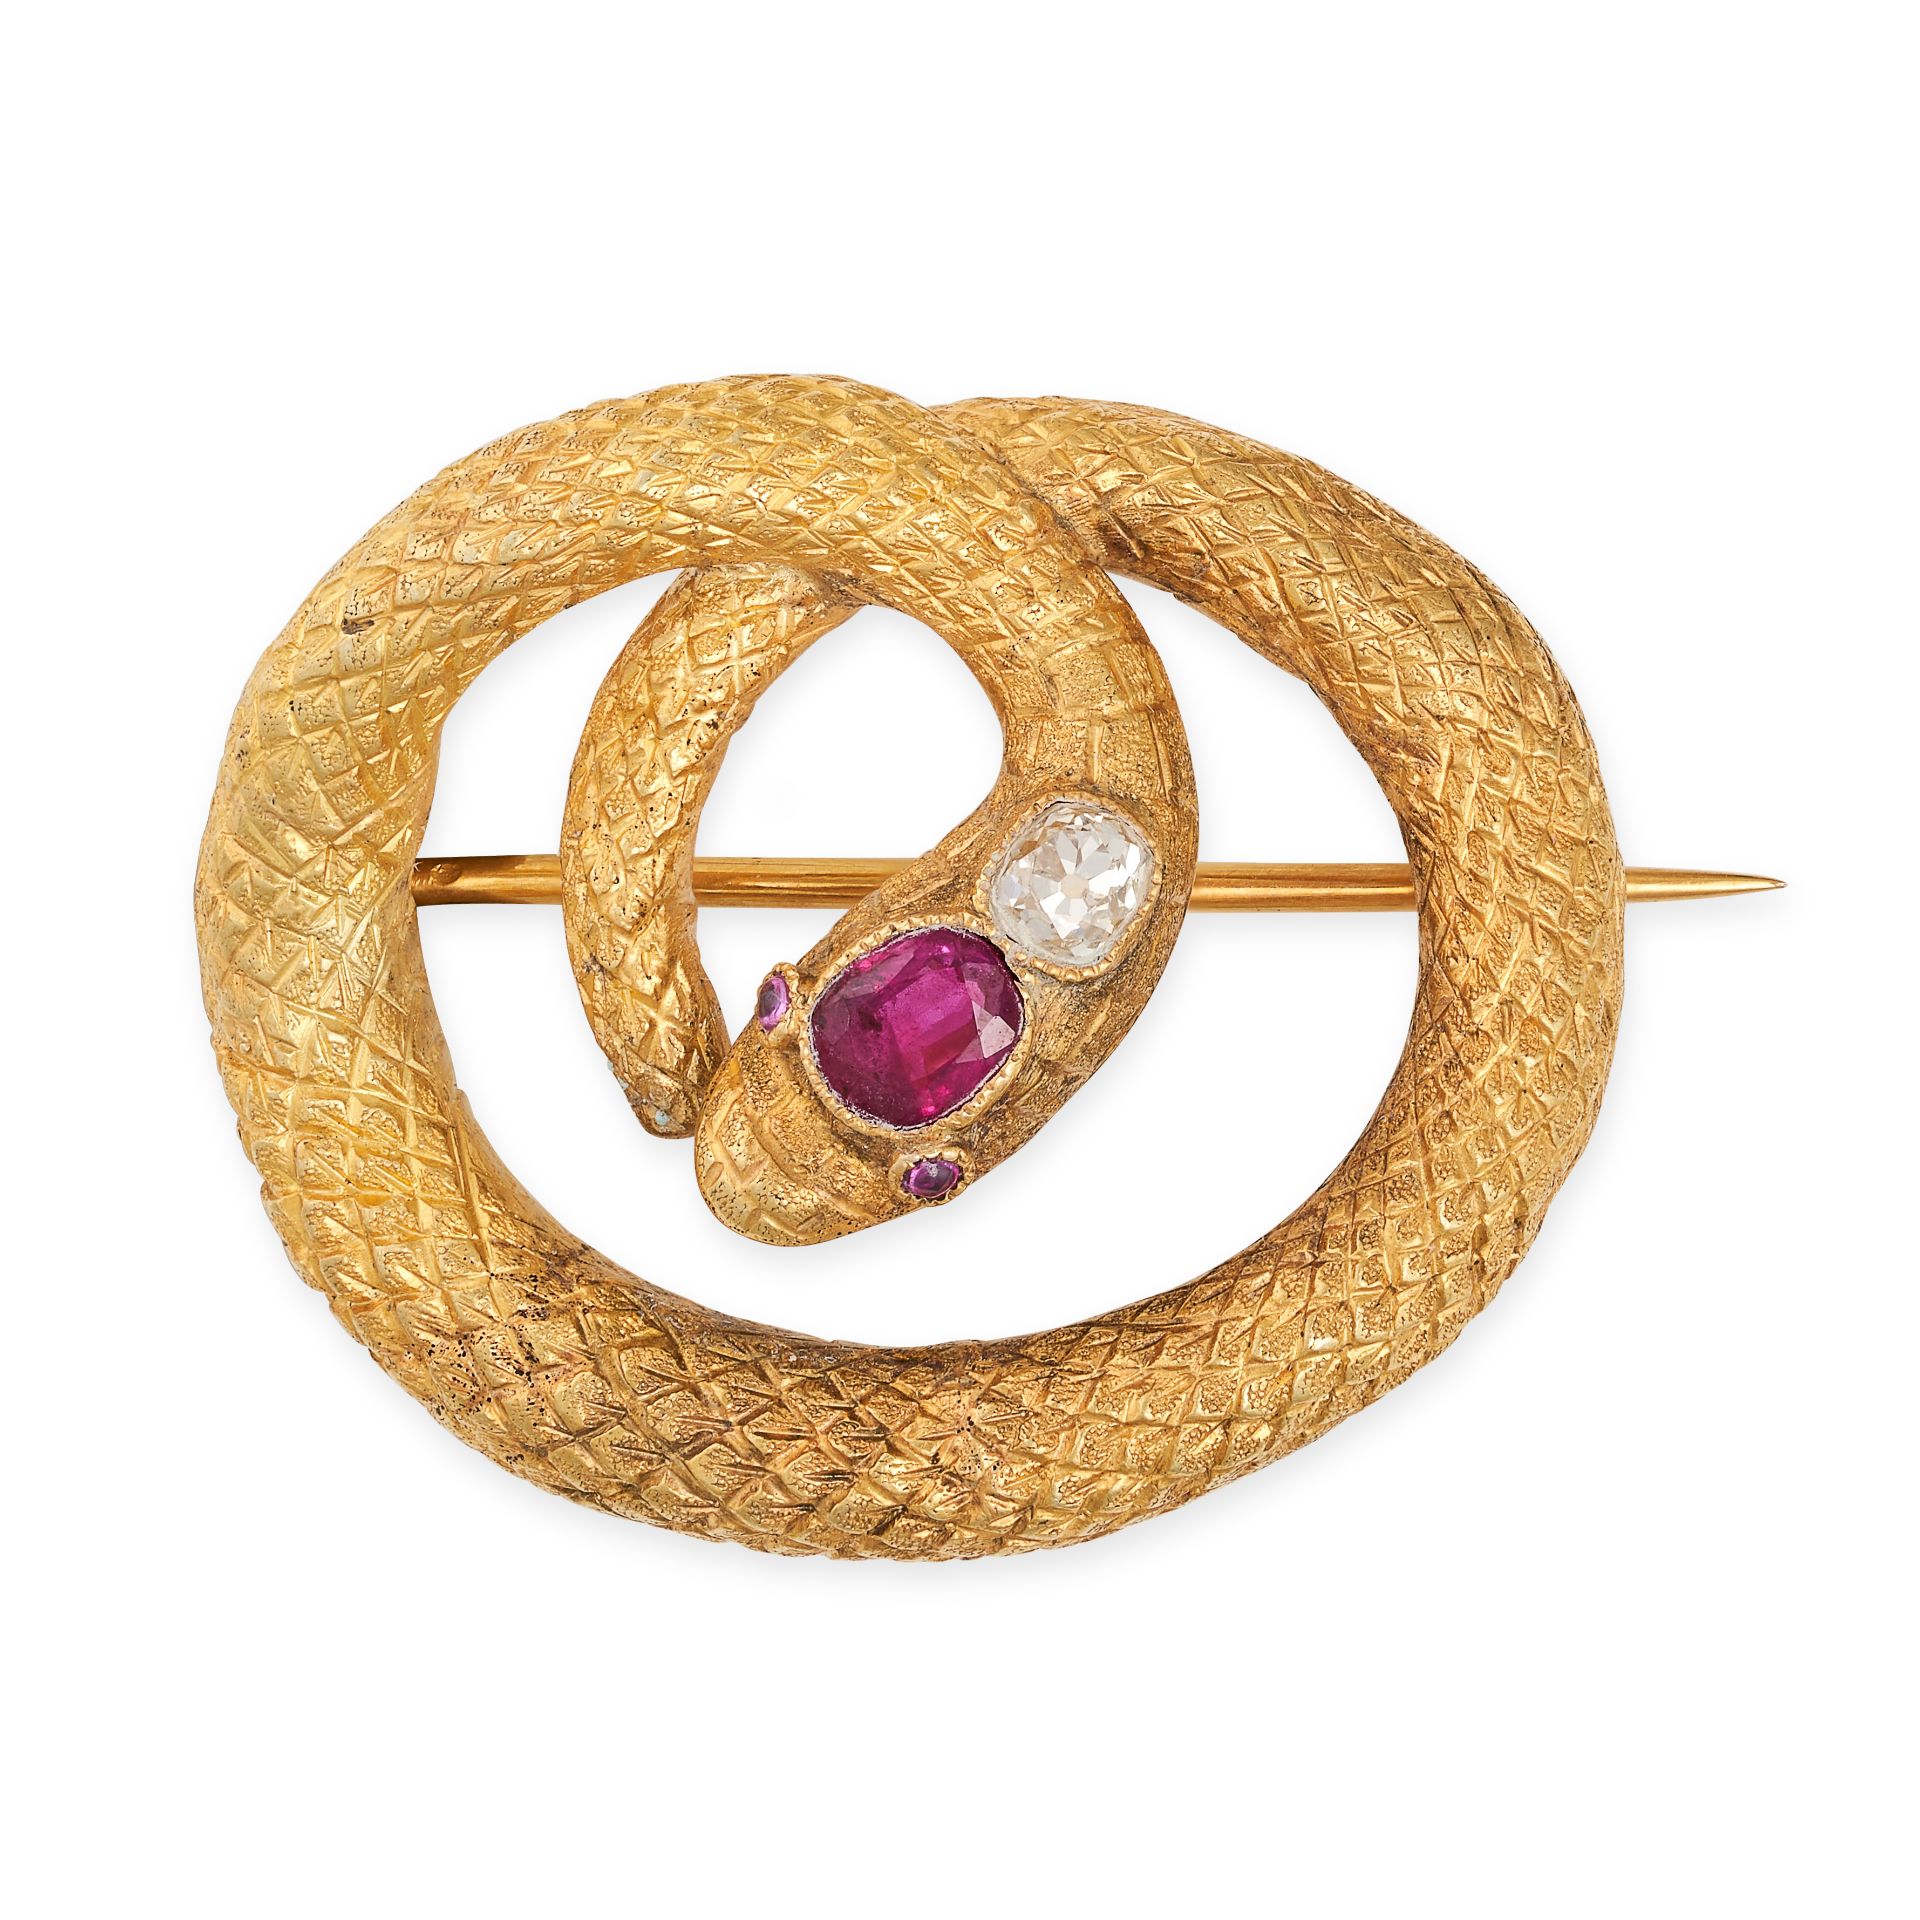 A FINE ANTIQUE RUBY AND DIAMOND SNAKE BROOCH in yellow gold, designed as a coiled engraved snake,...